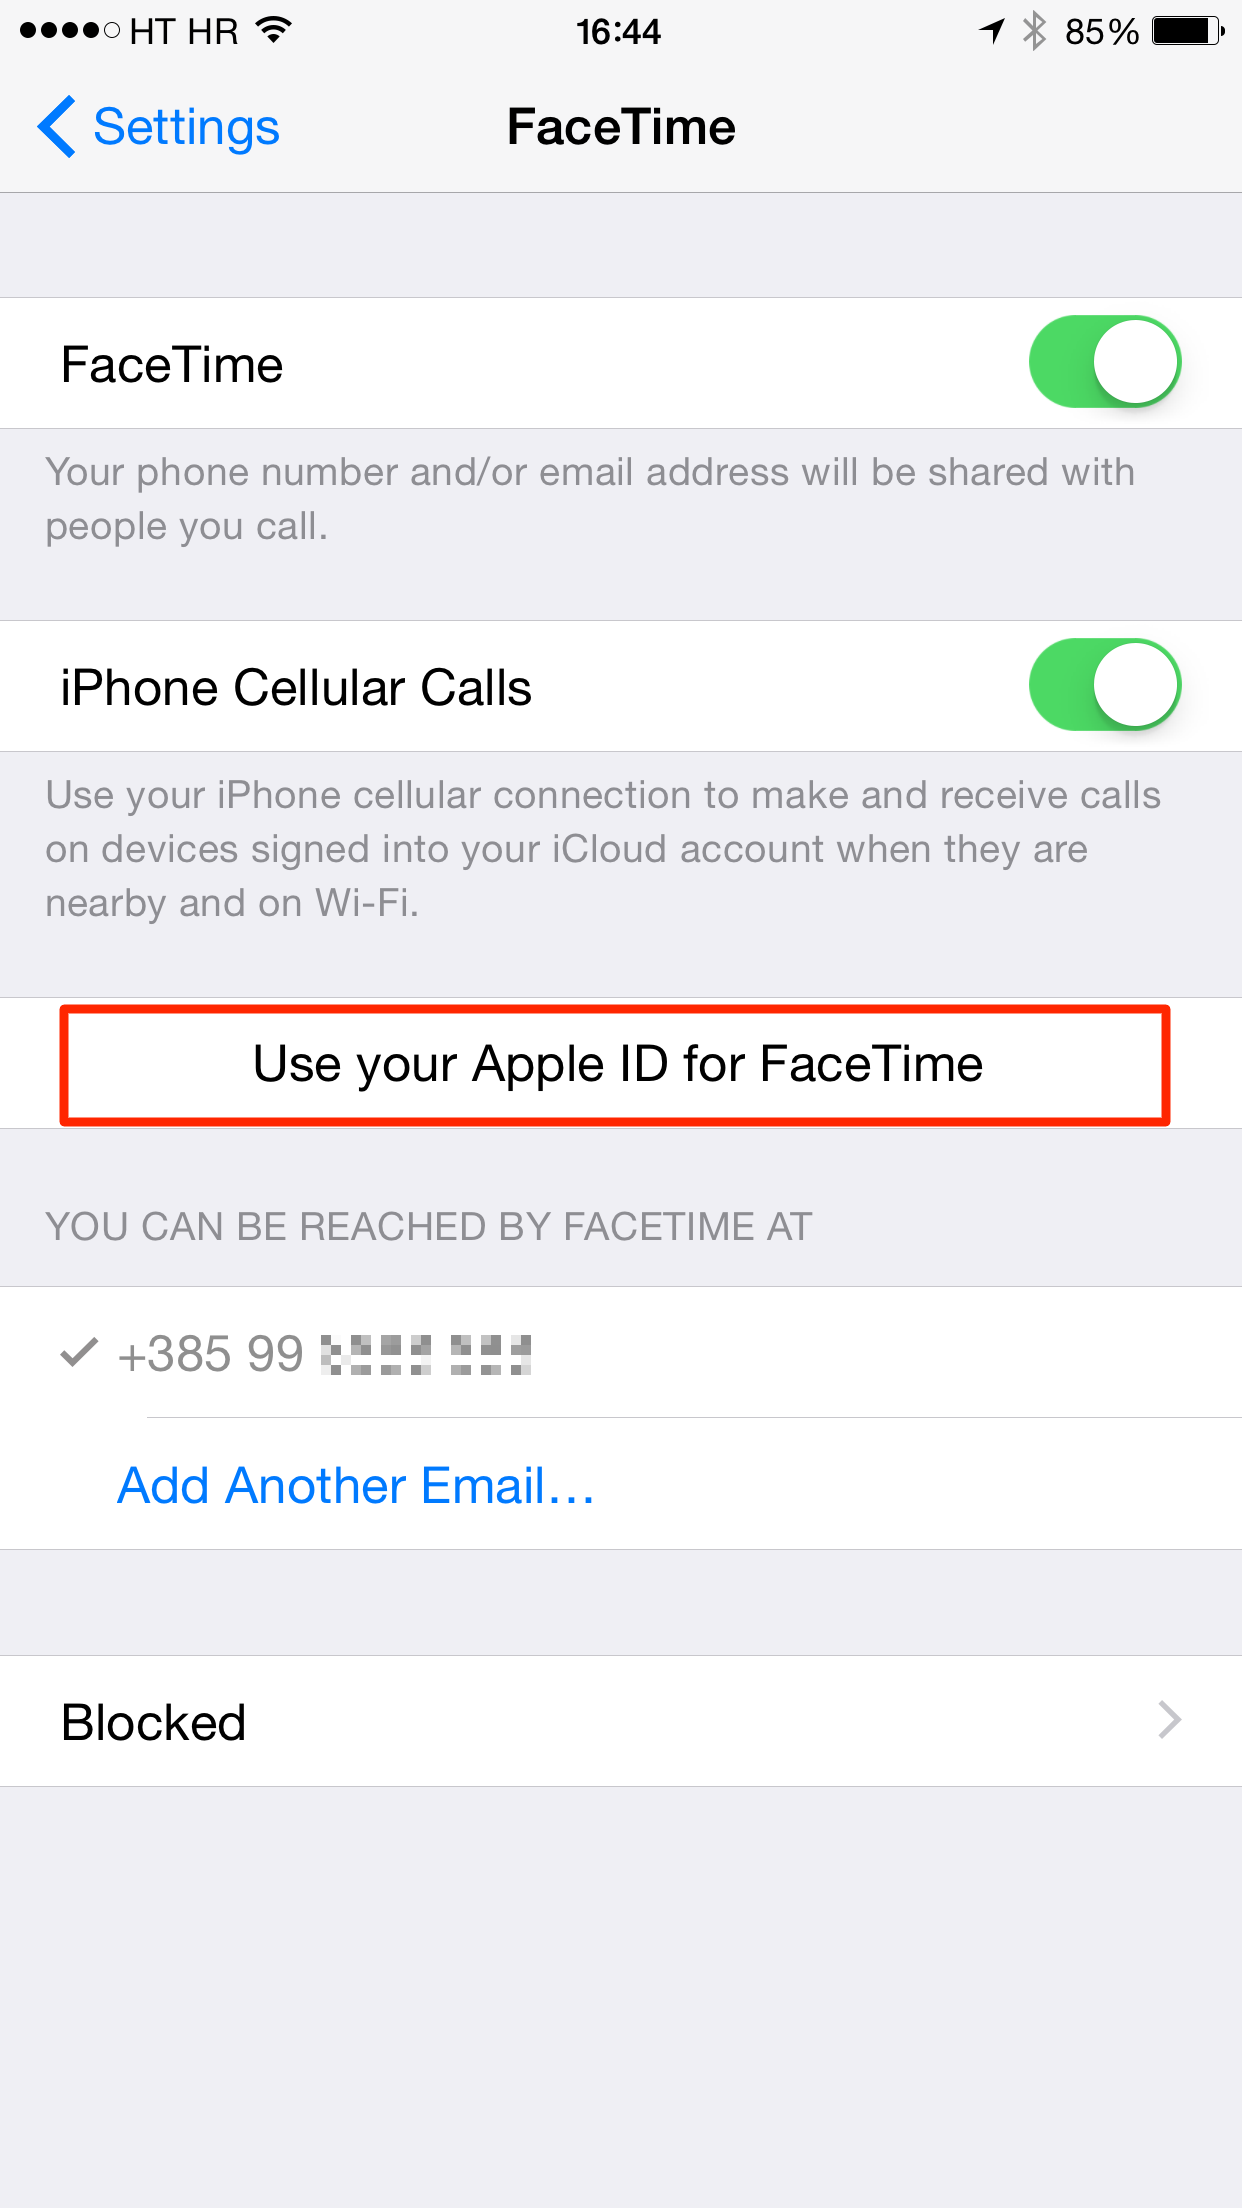 iOS-8-FaceTime-iPhone-Cellular-Calls-003.png